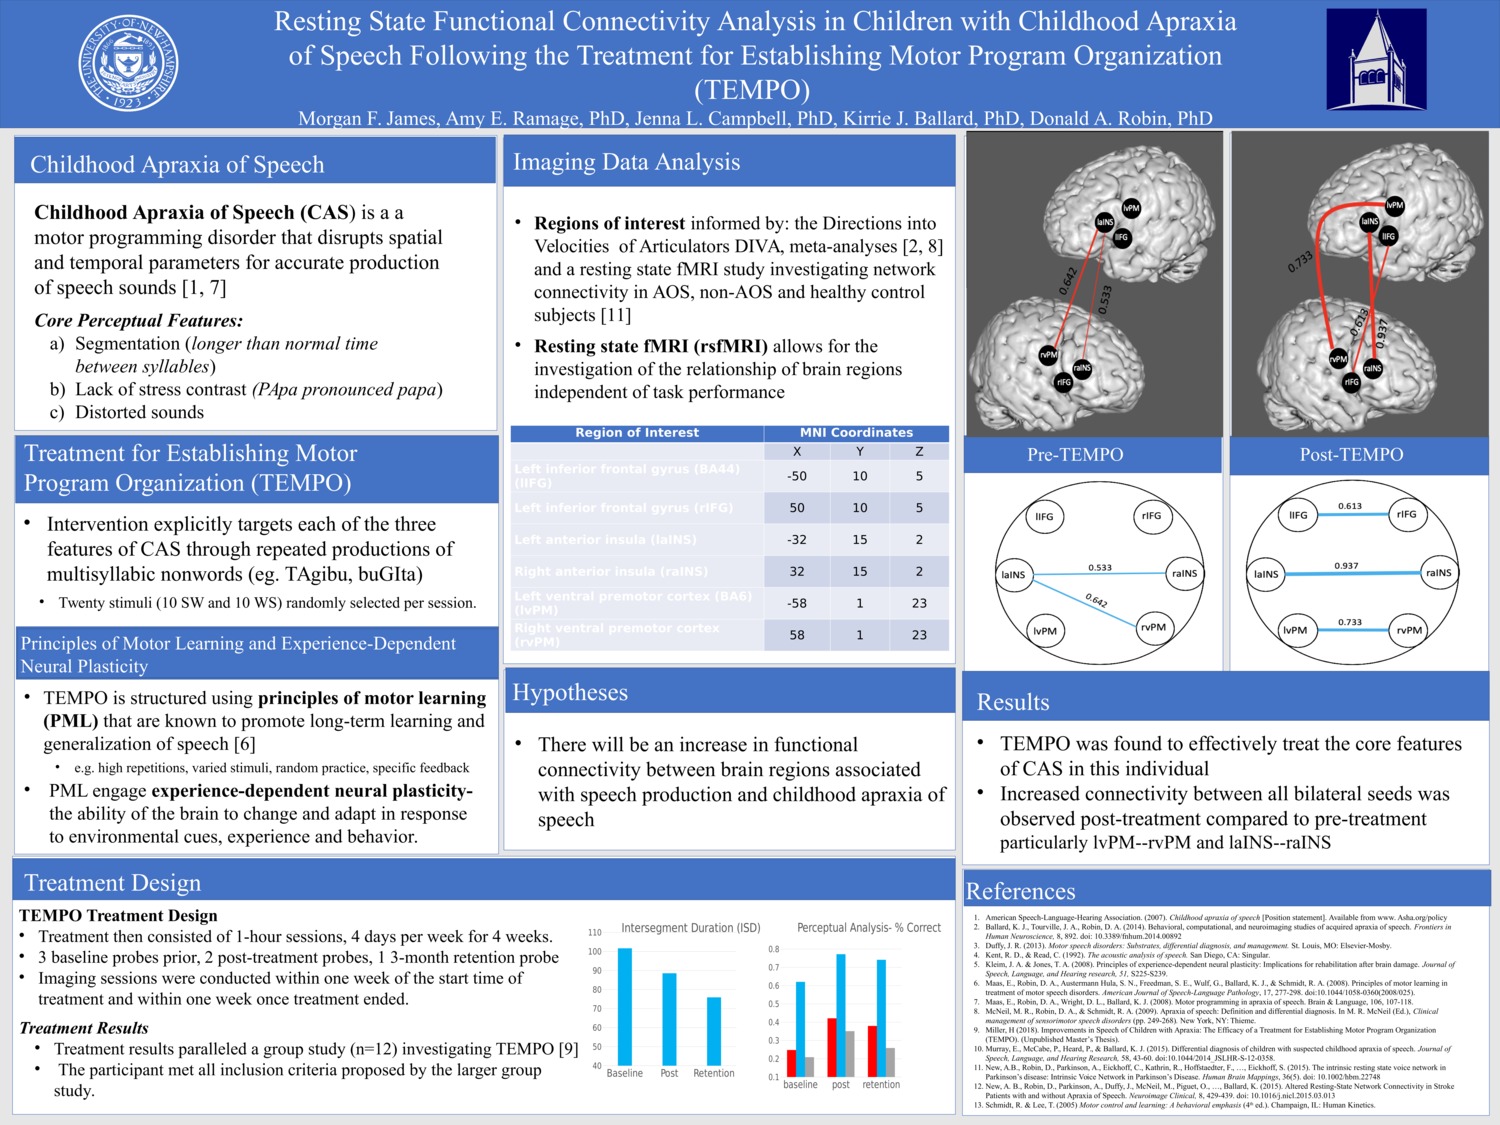 Resting State Functional Connectivity Analysis In Children With Childhood Apraxia Of Speech Following The Treatment For Establishing Motor Program Organization  by mfg36